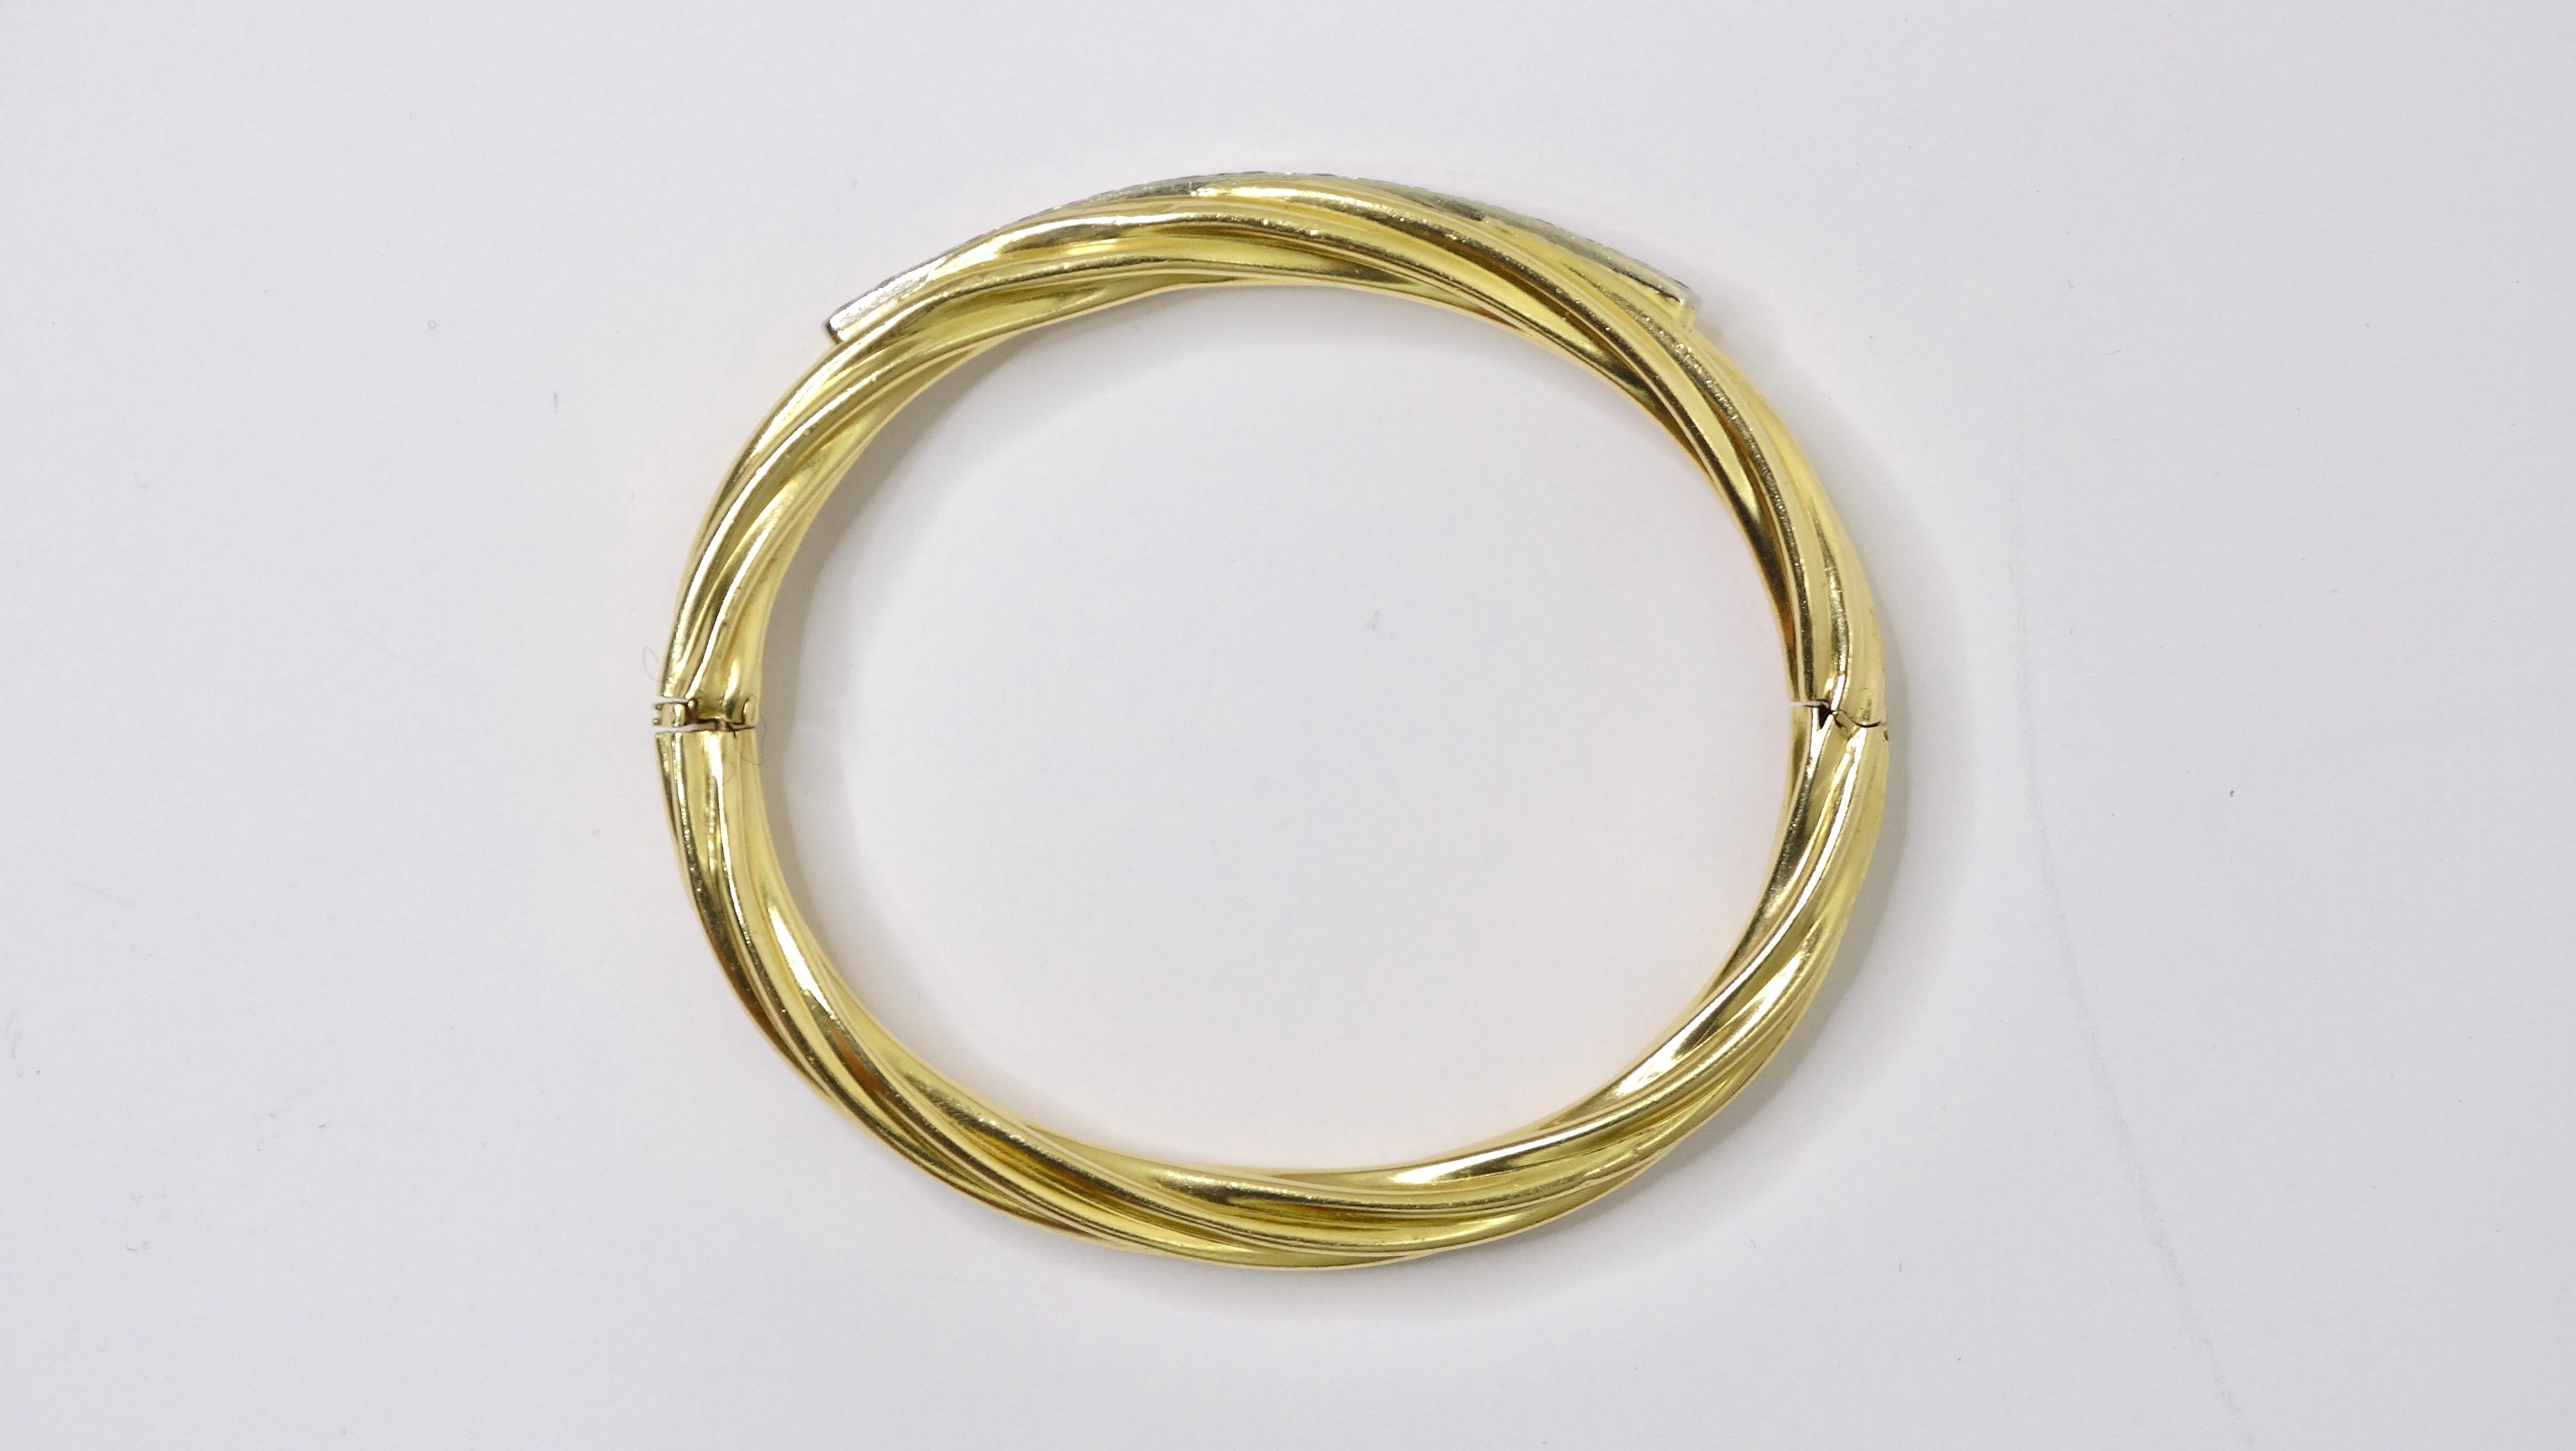 A beautifully done bracelet to add to your collection. This bangle-style bracelet has a great 18k gold rope-textured band encrusted with 17 diamonds with an approximate ctw of 2. This is sophistication and class wrapped into a bracelet. Wear this as